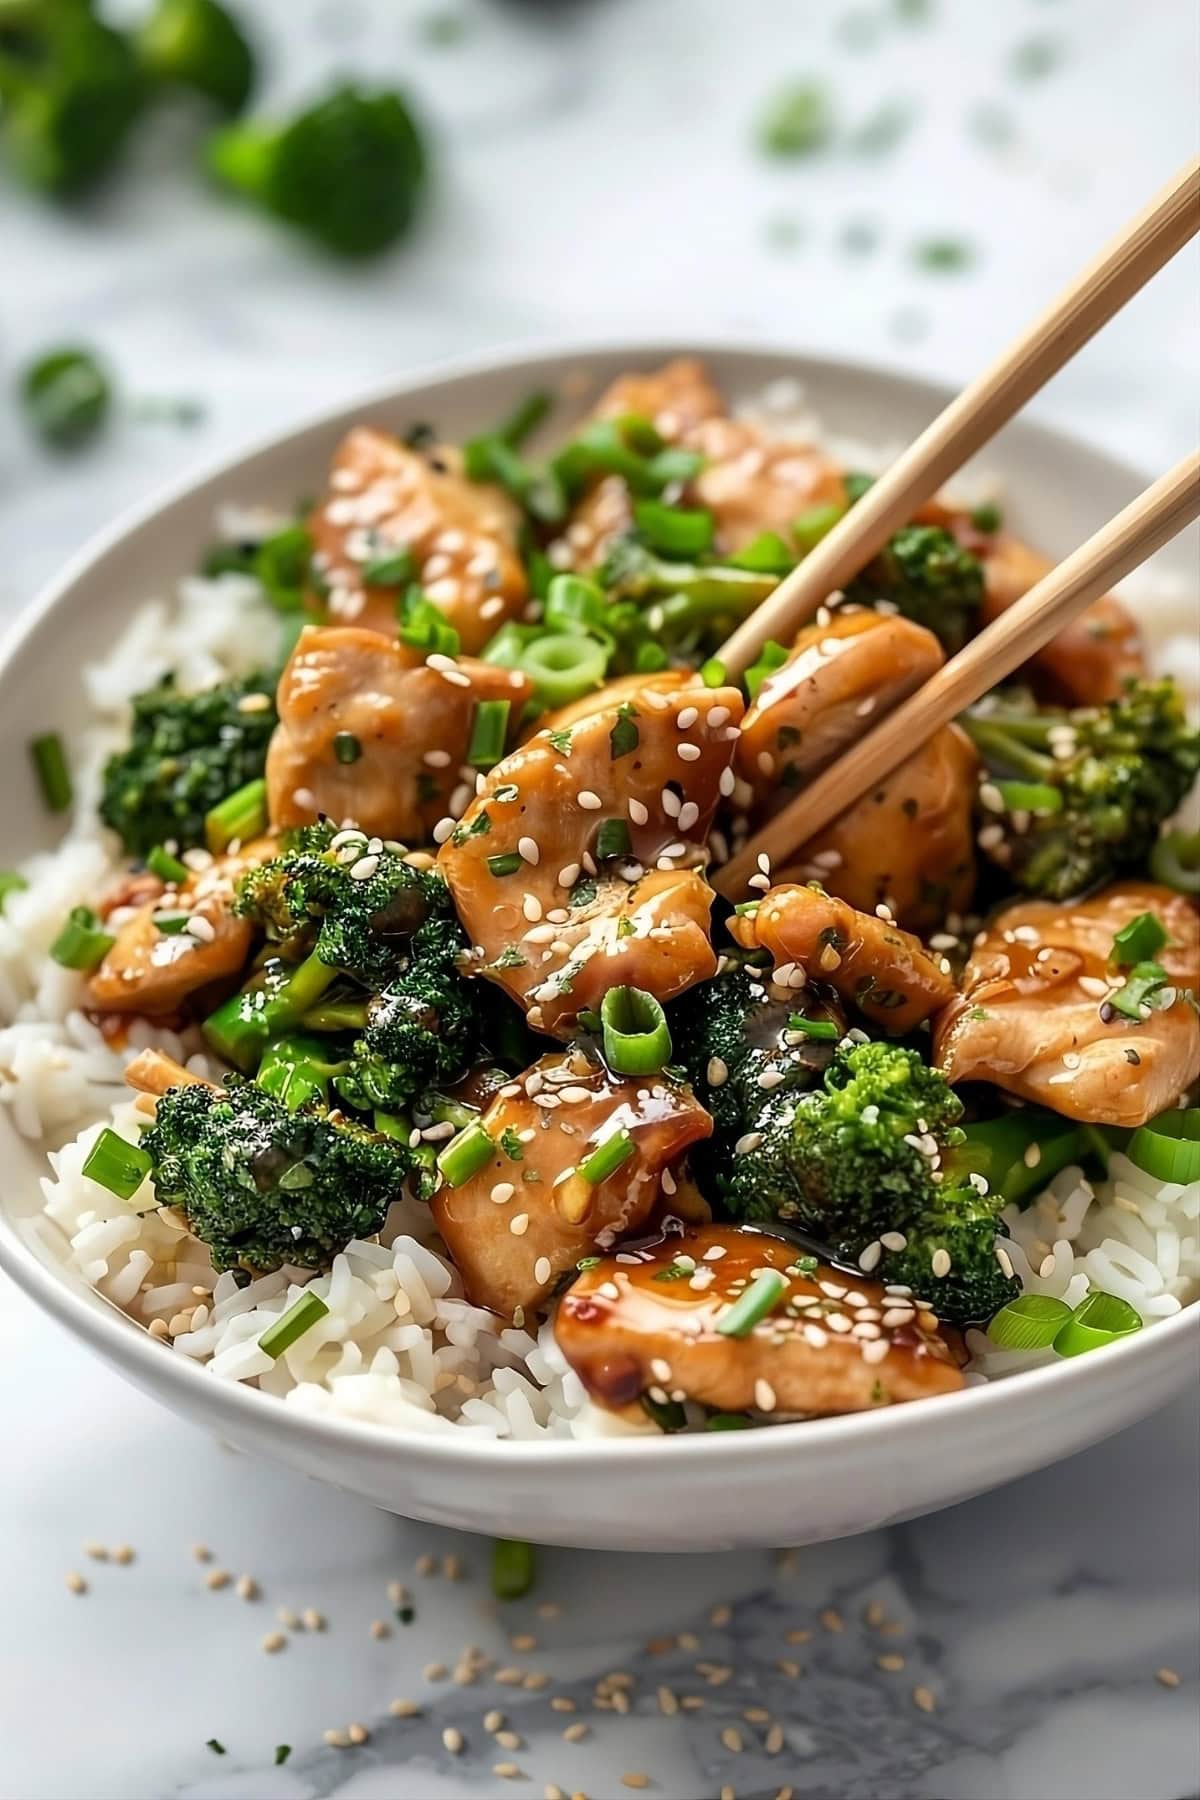 Chicken and Broccoli Stir-Fry - Insanely Good